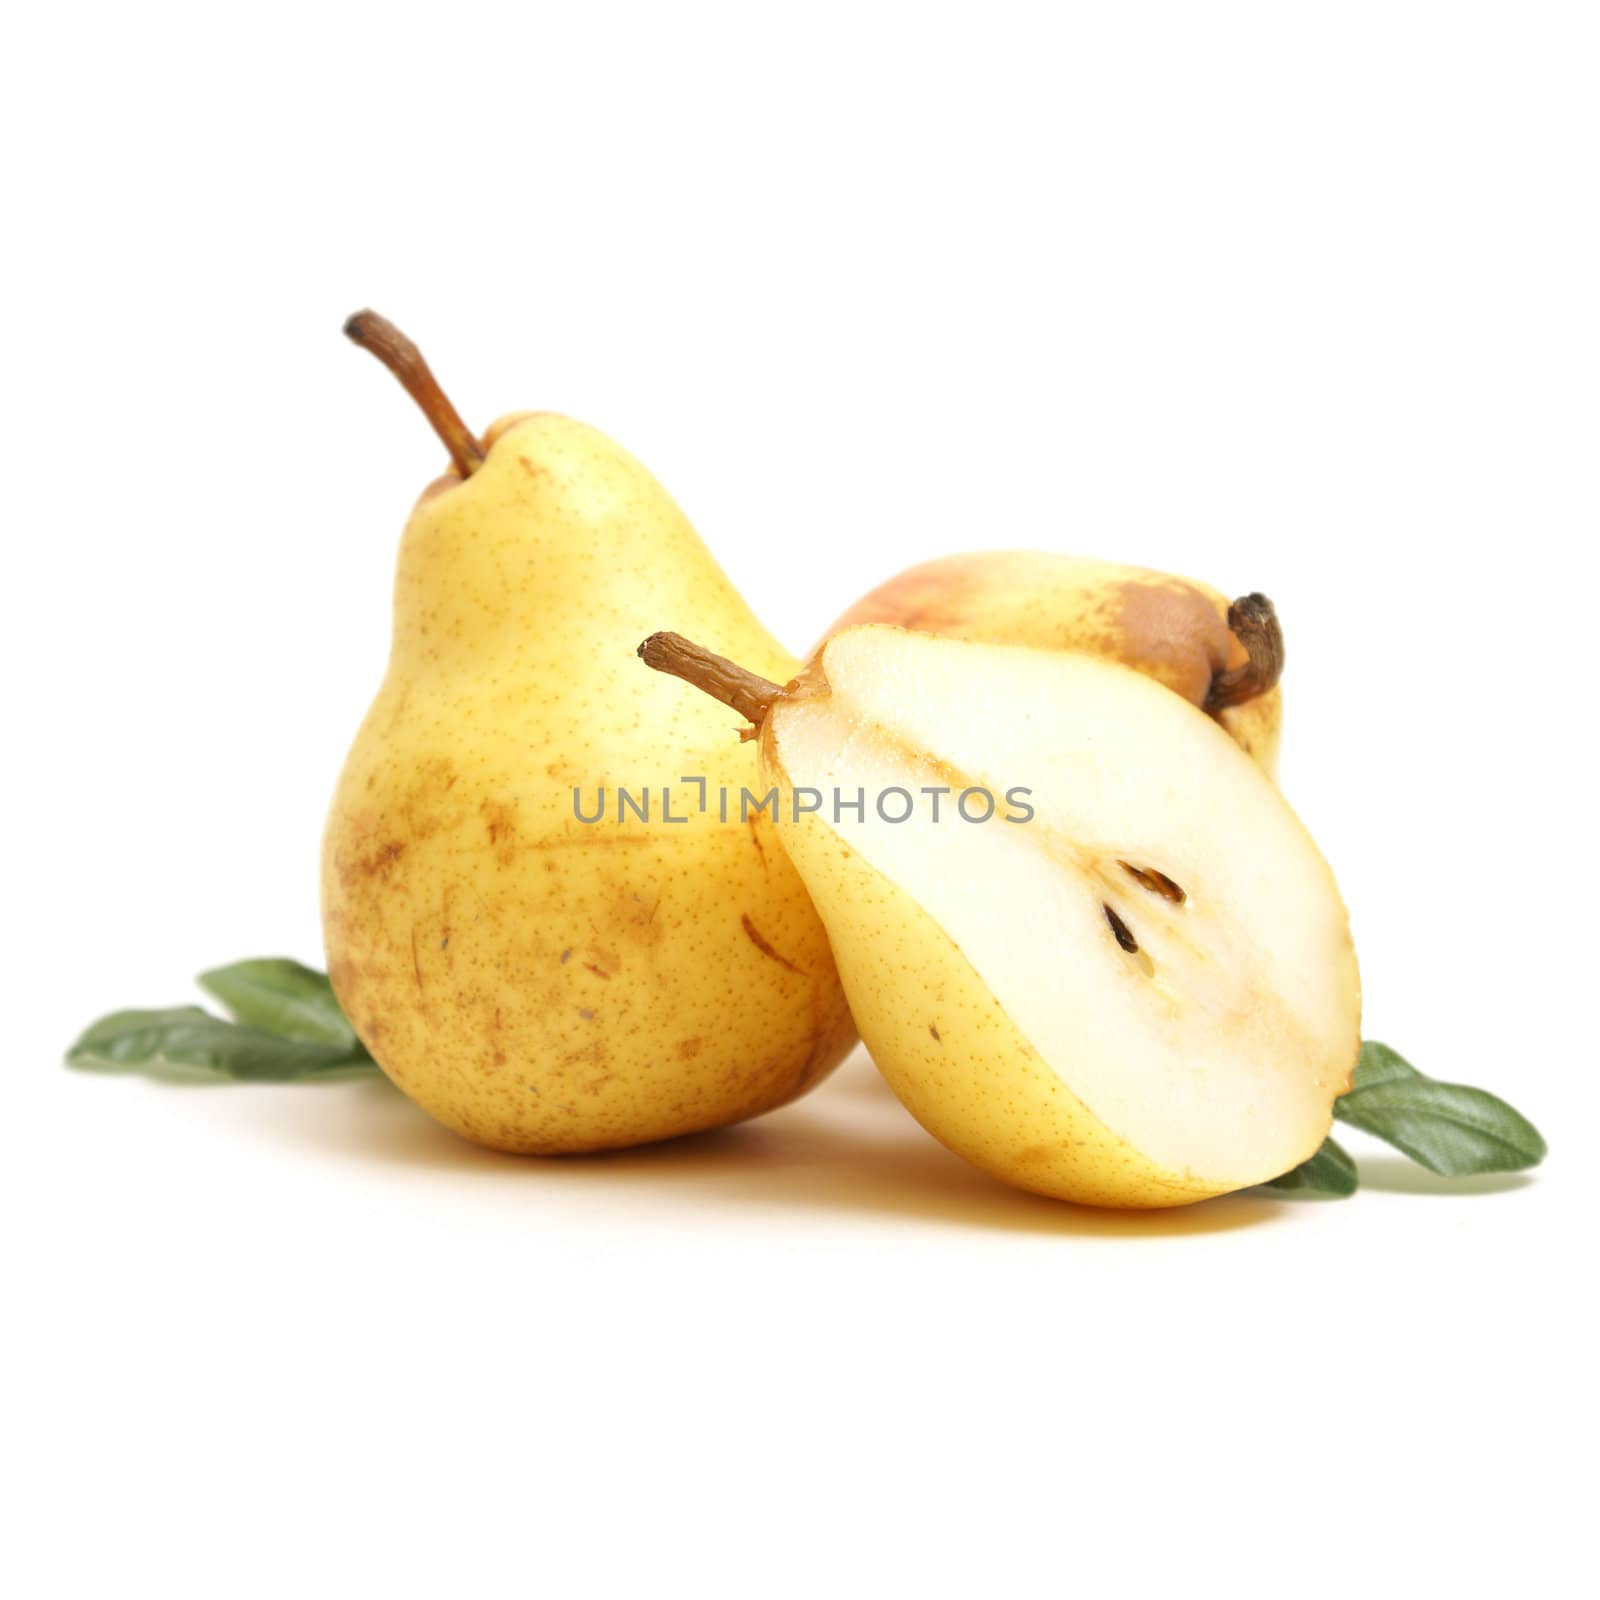 A few isolated pears with one that is cut in half.